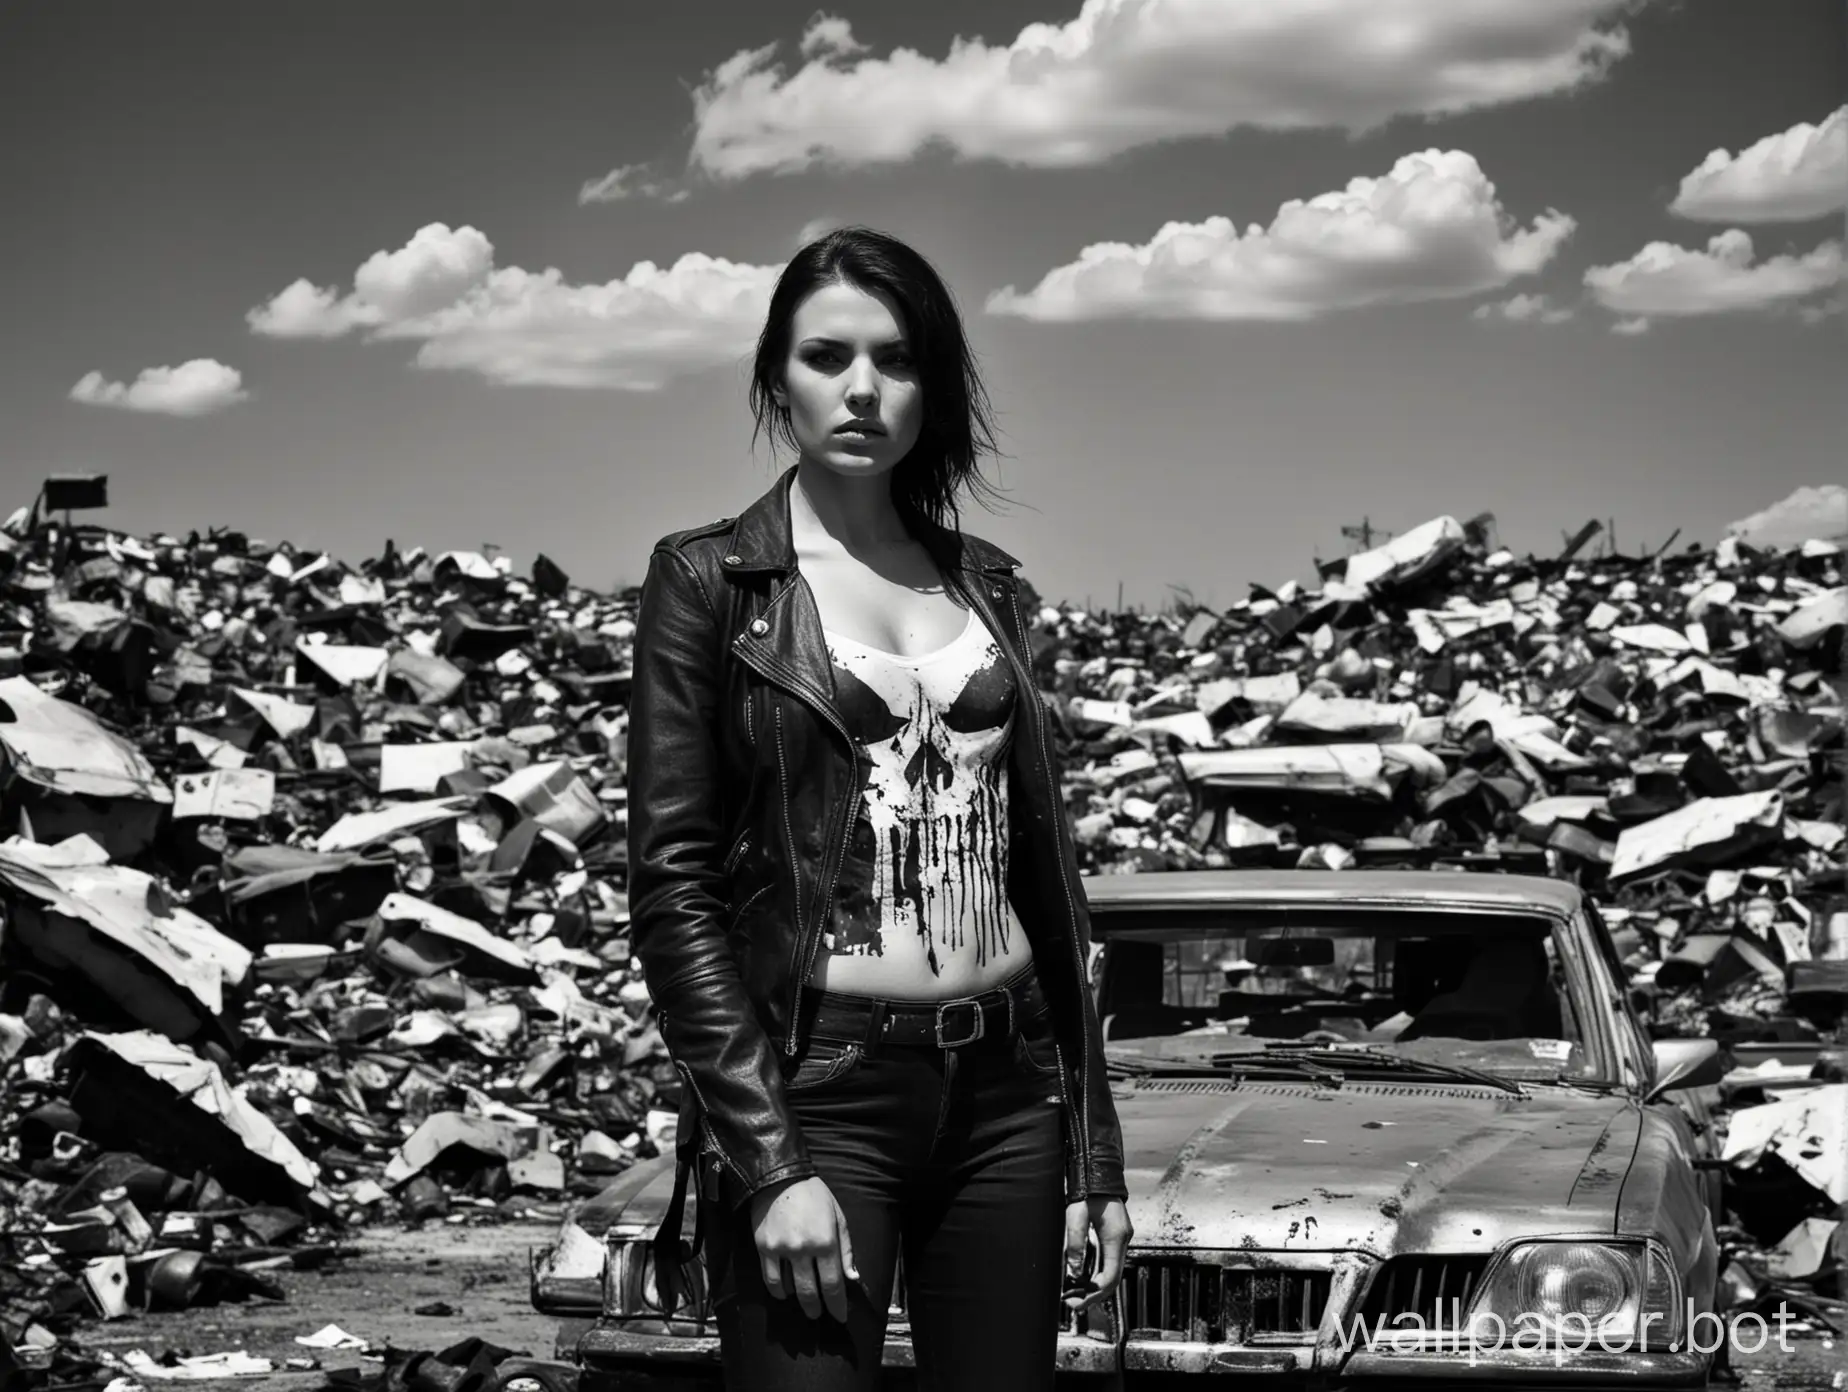 Gritty-Black-and-White-Portrait-of-The-Punisher-Woman-in-a-Car-Dump